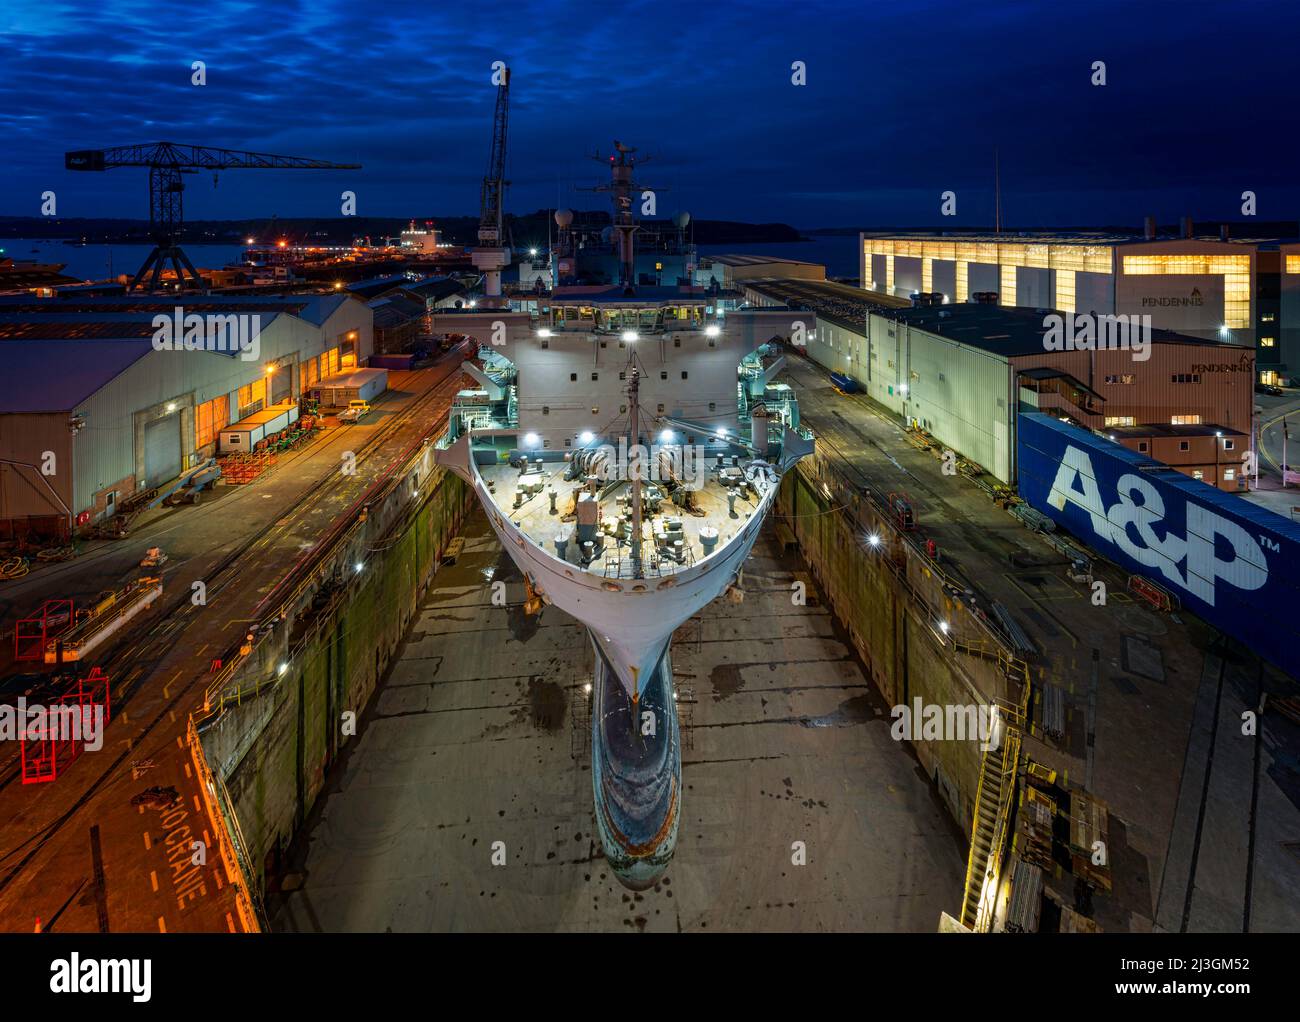 A night floodlit view of the Royal Fleet Auxiliary hospital ship RFA Argus in dry dock at the A&P facility in Falmouth, Cornwall - March 2018. Stock Photo